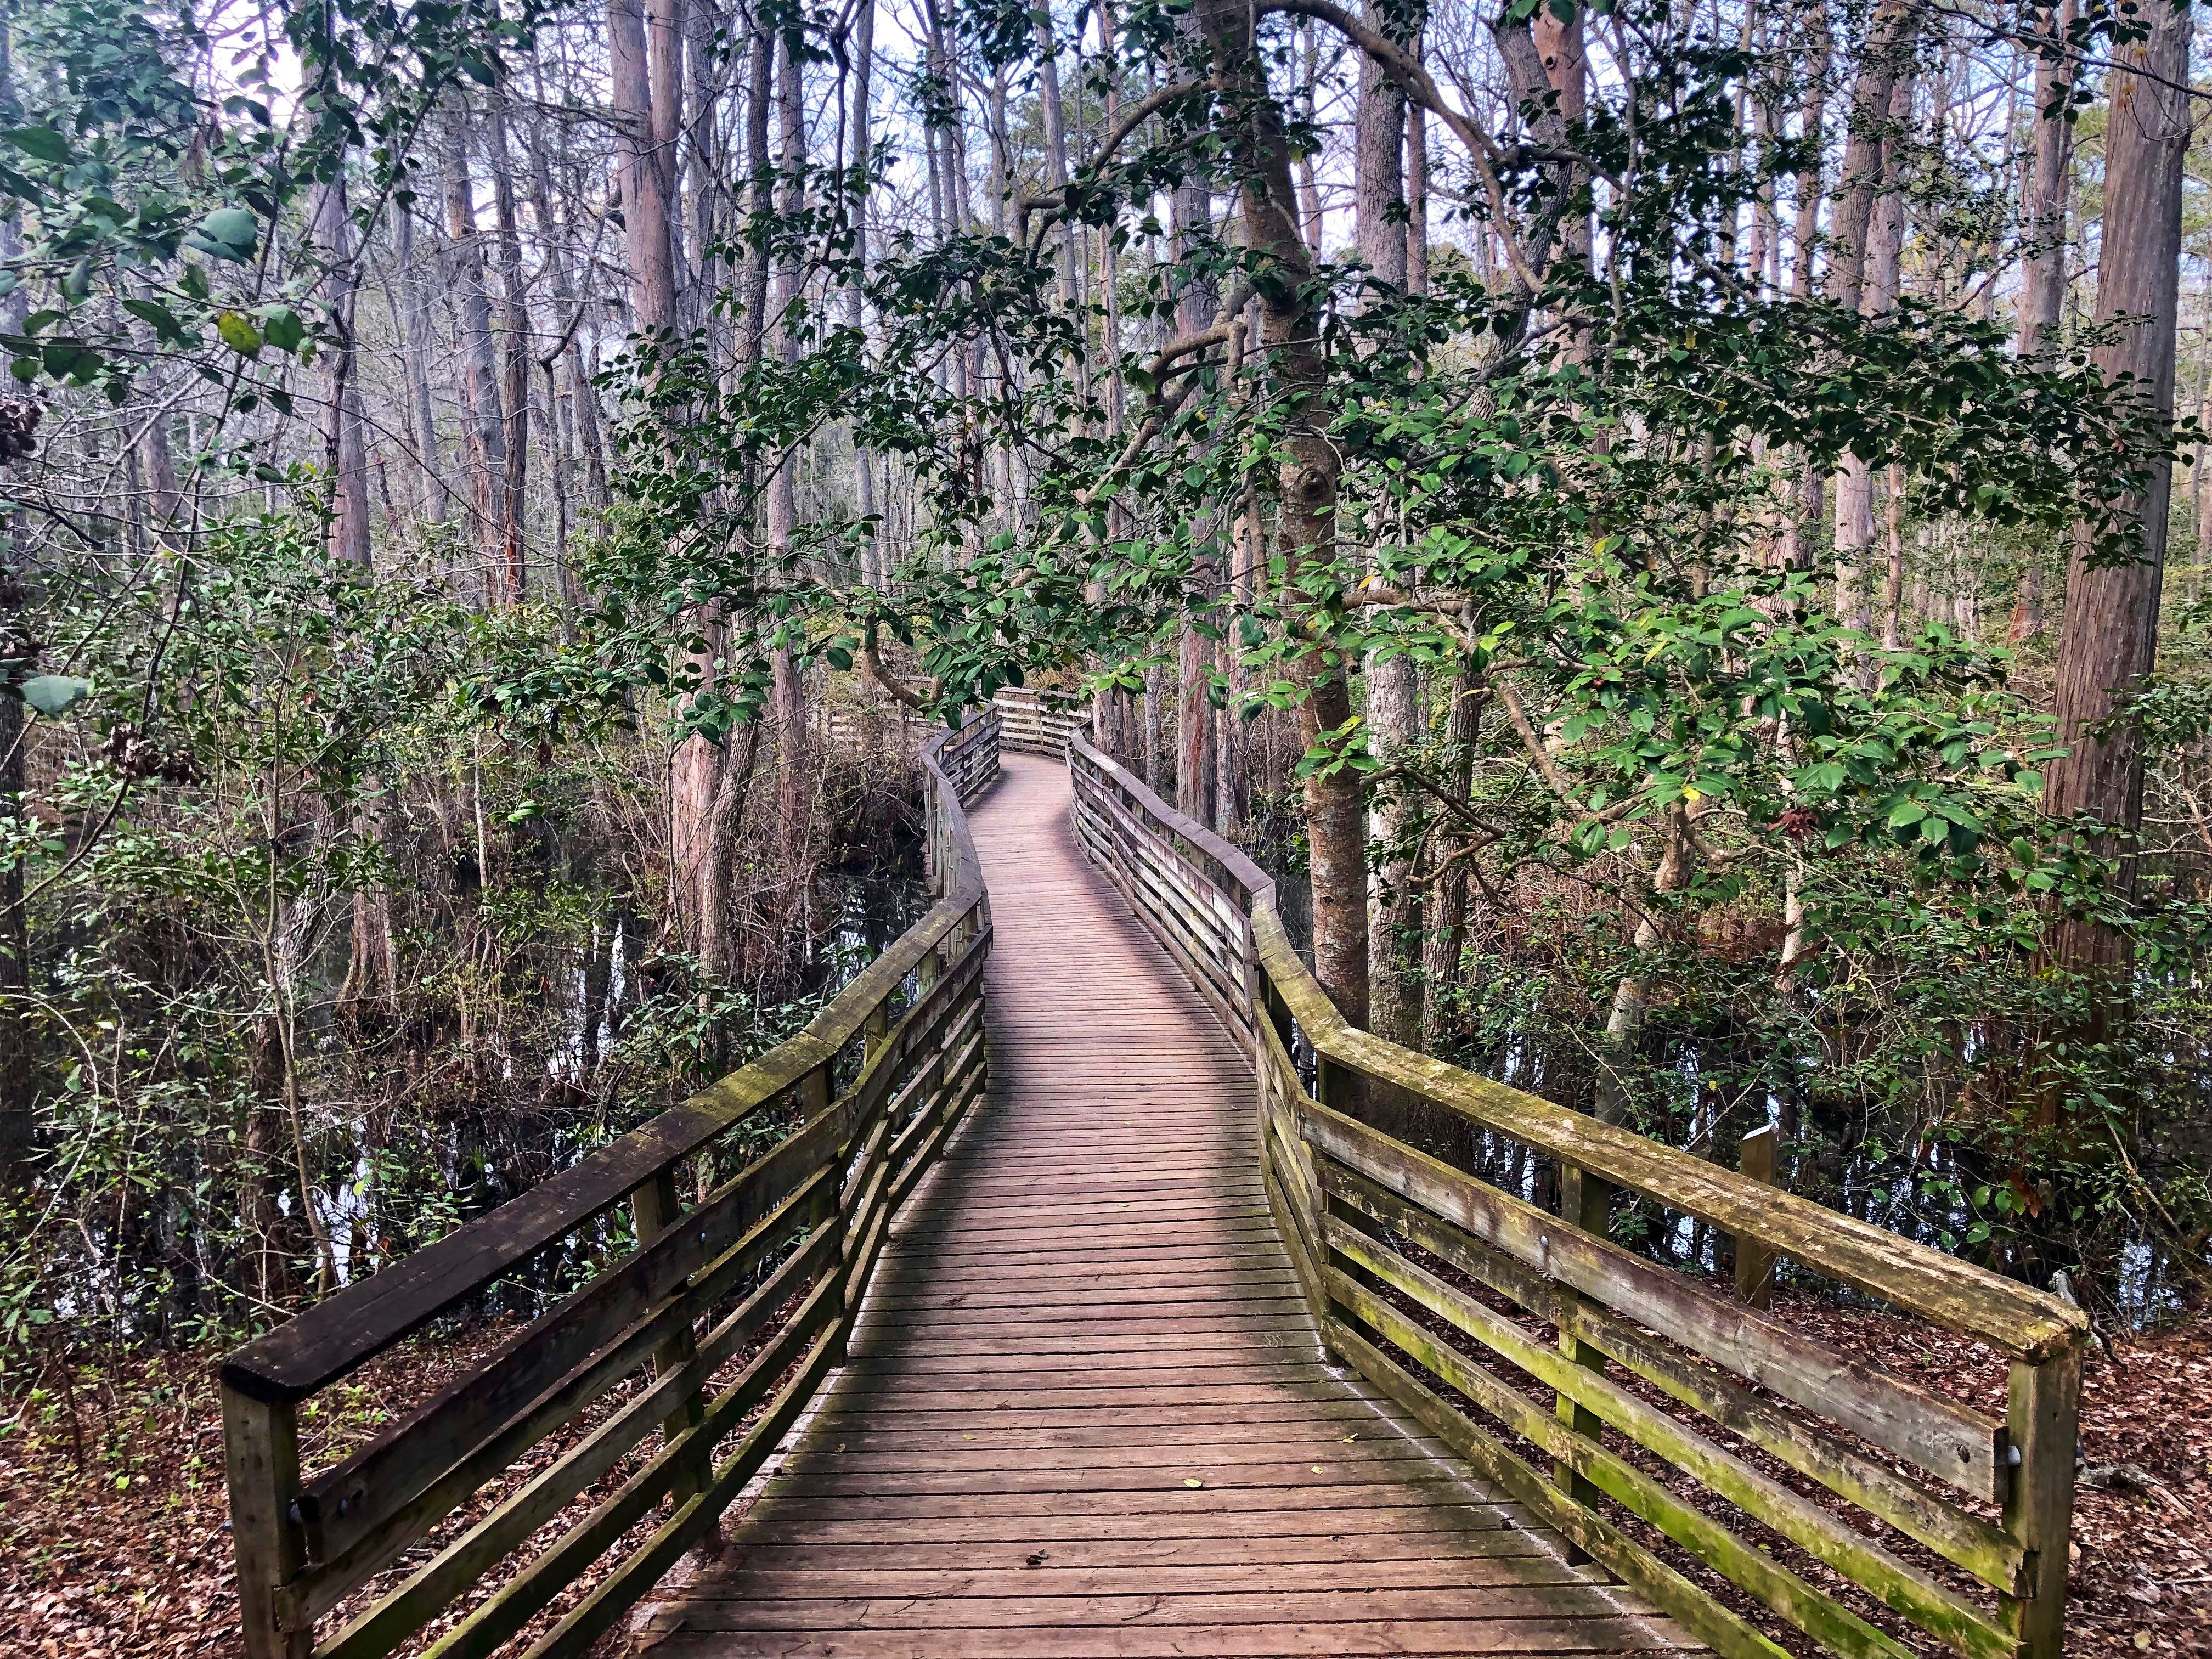 Boardwalk on one of the park trails